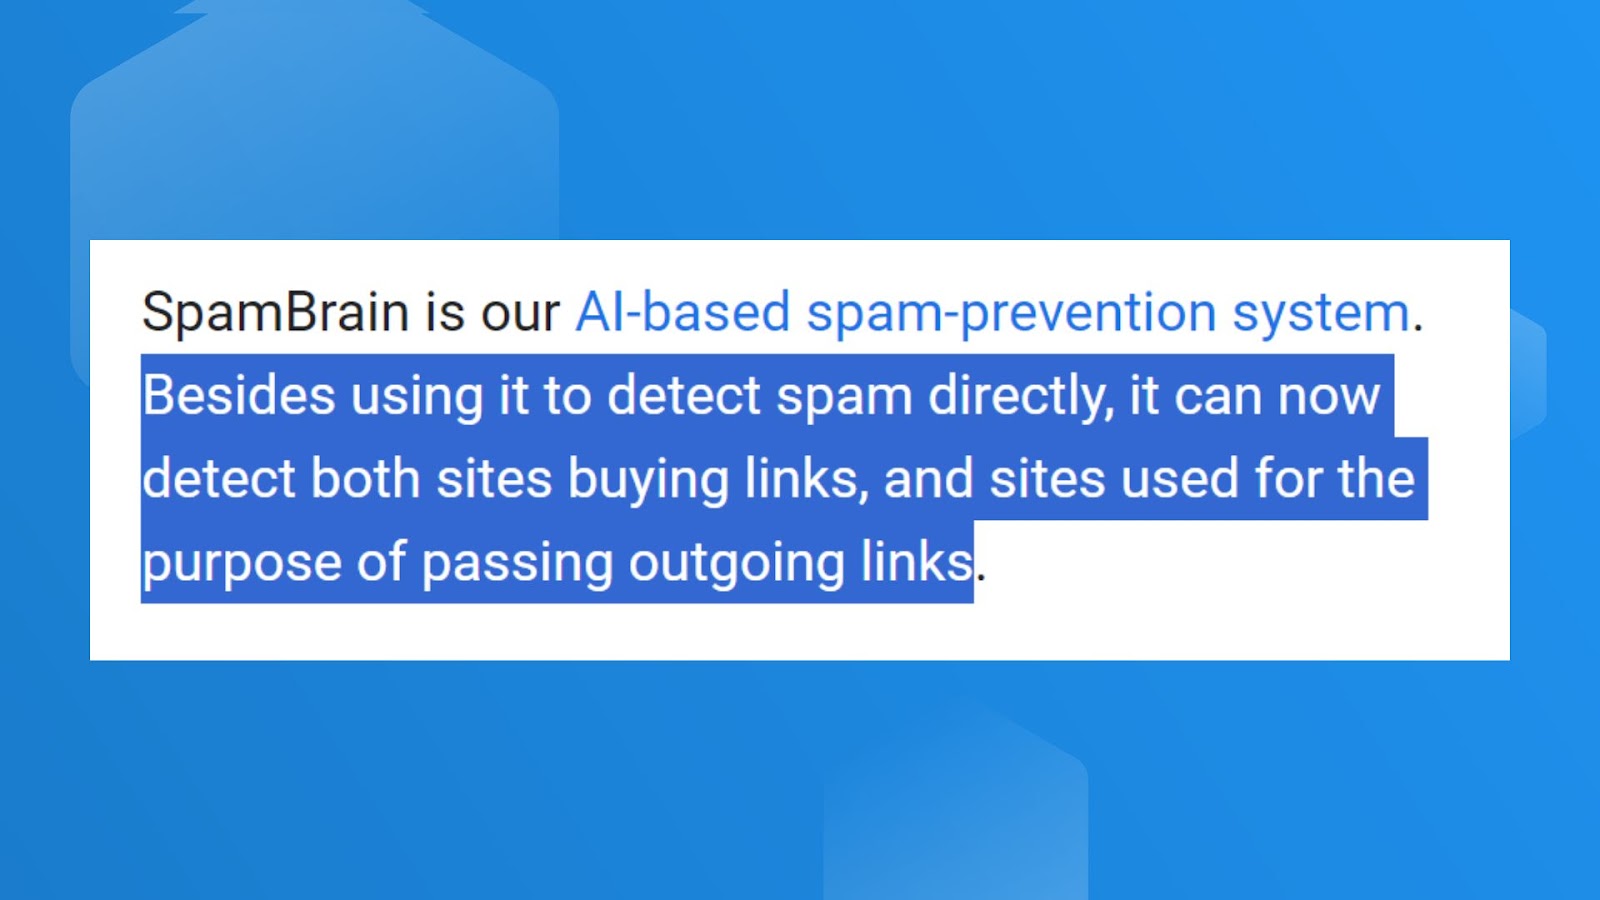 Google's statement on the uses of SpamBrain